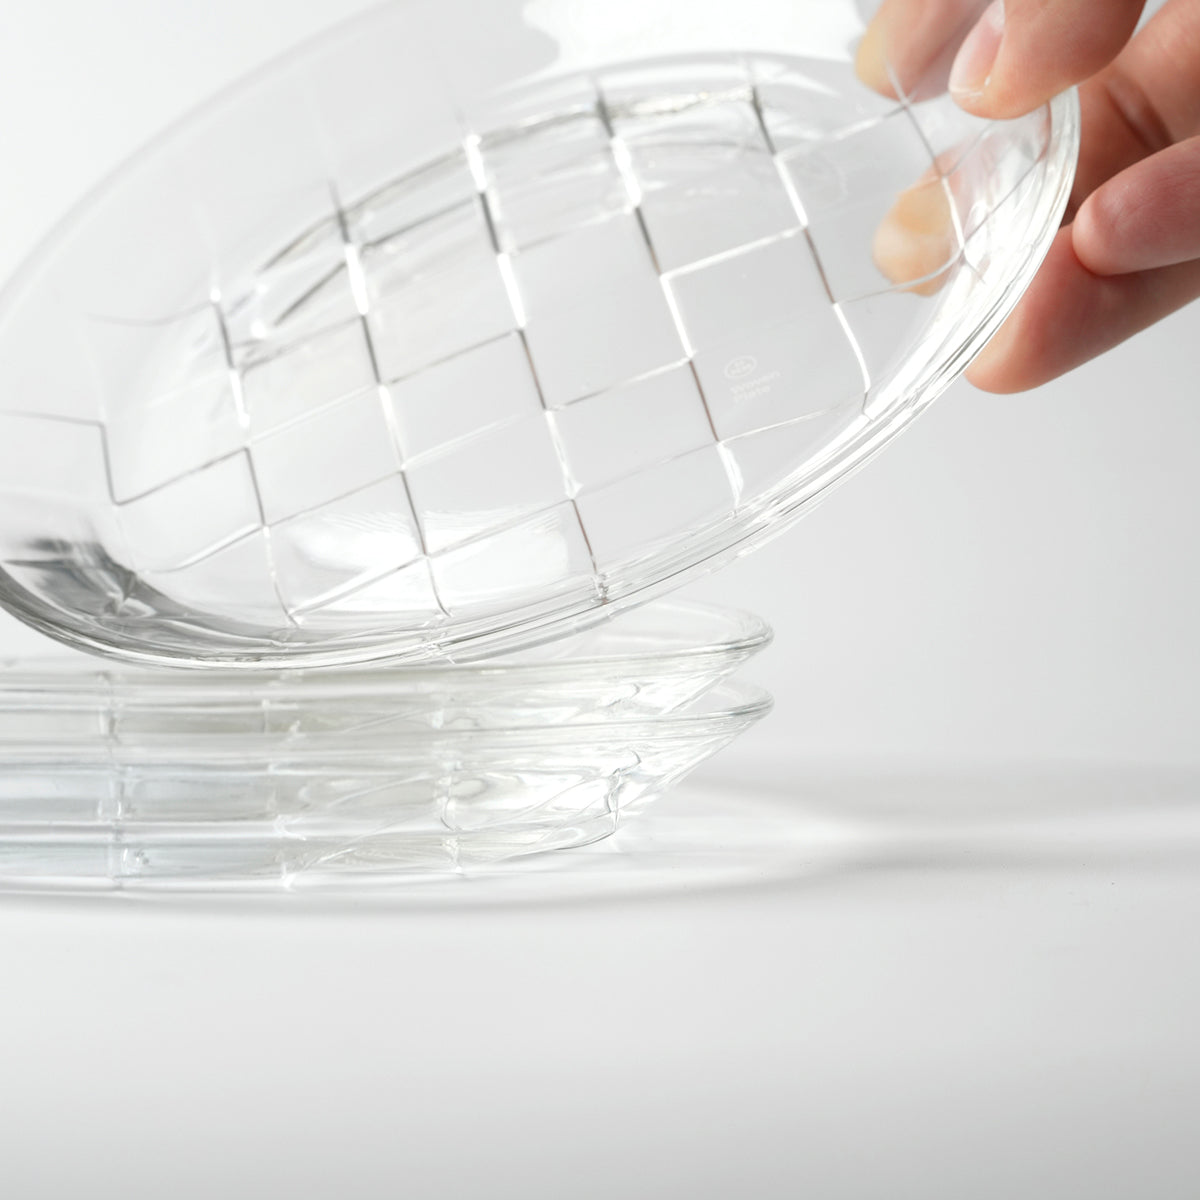 Recycled glass plate from Taiwanese craftmanship. Golden Pin Design Award. Glass tableware.